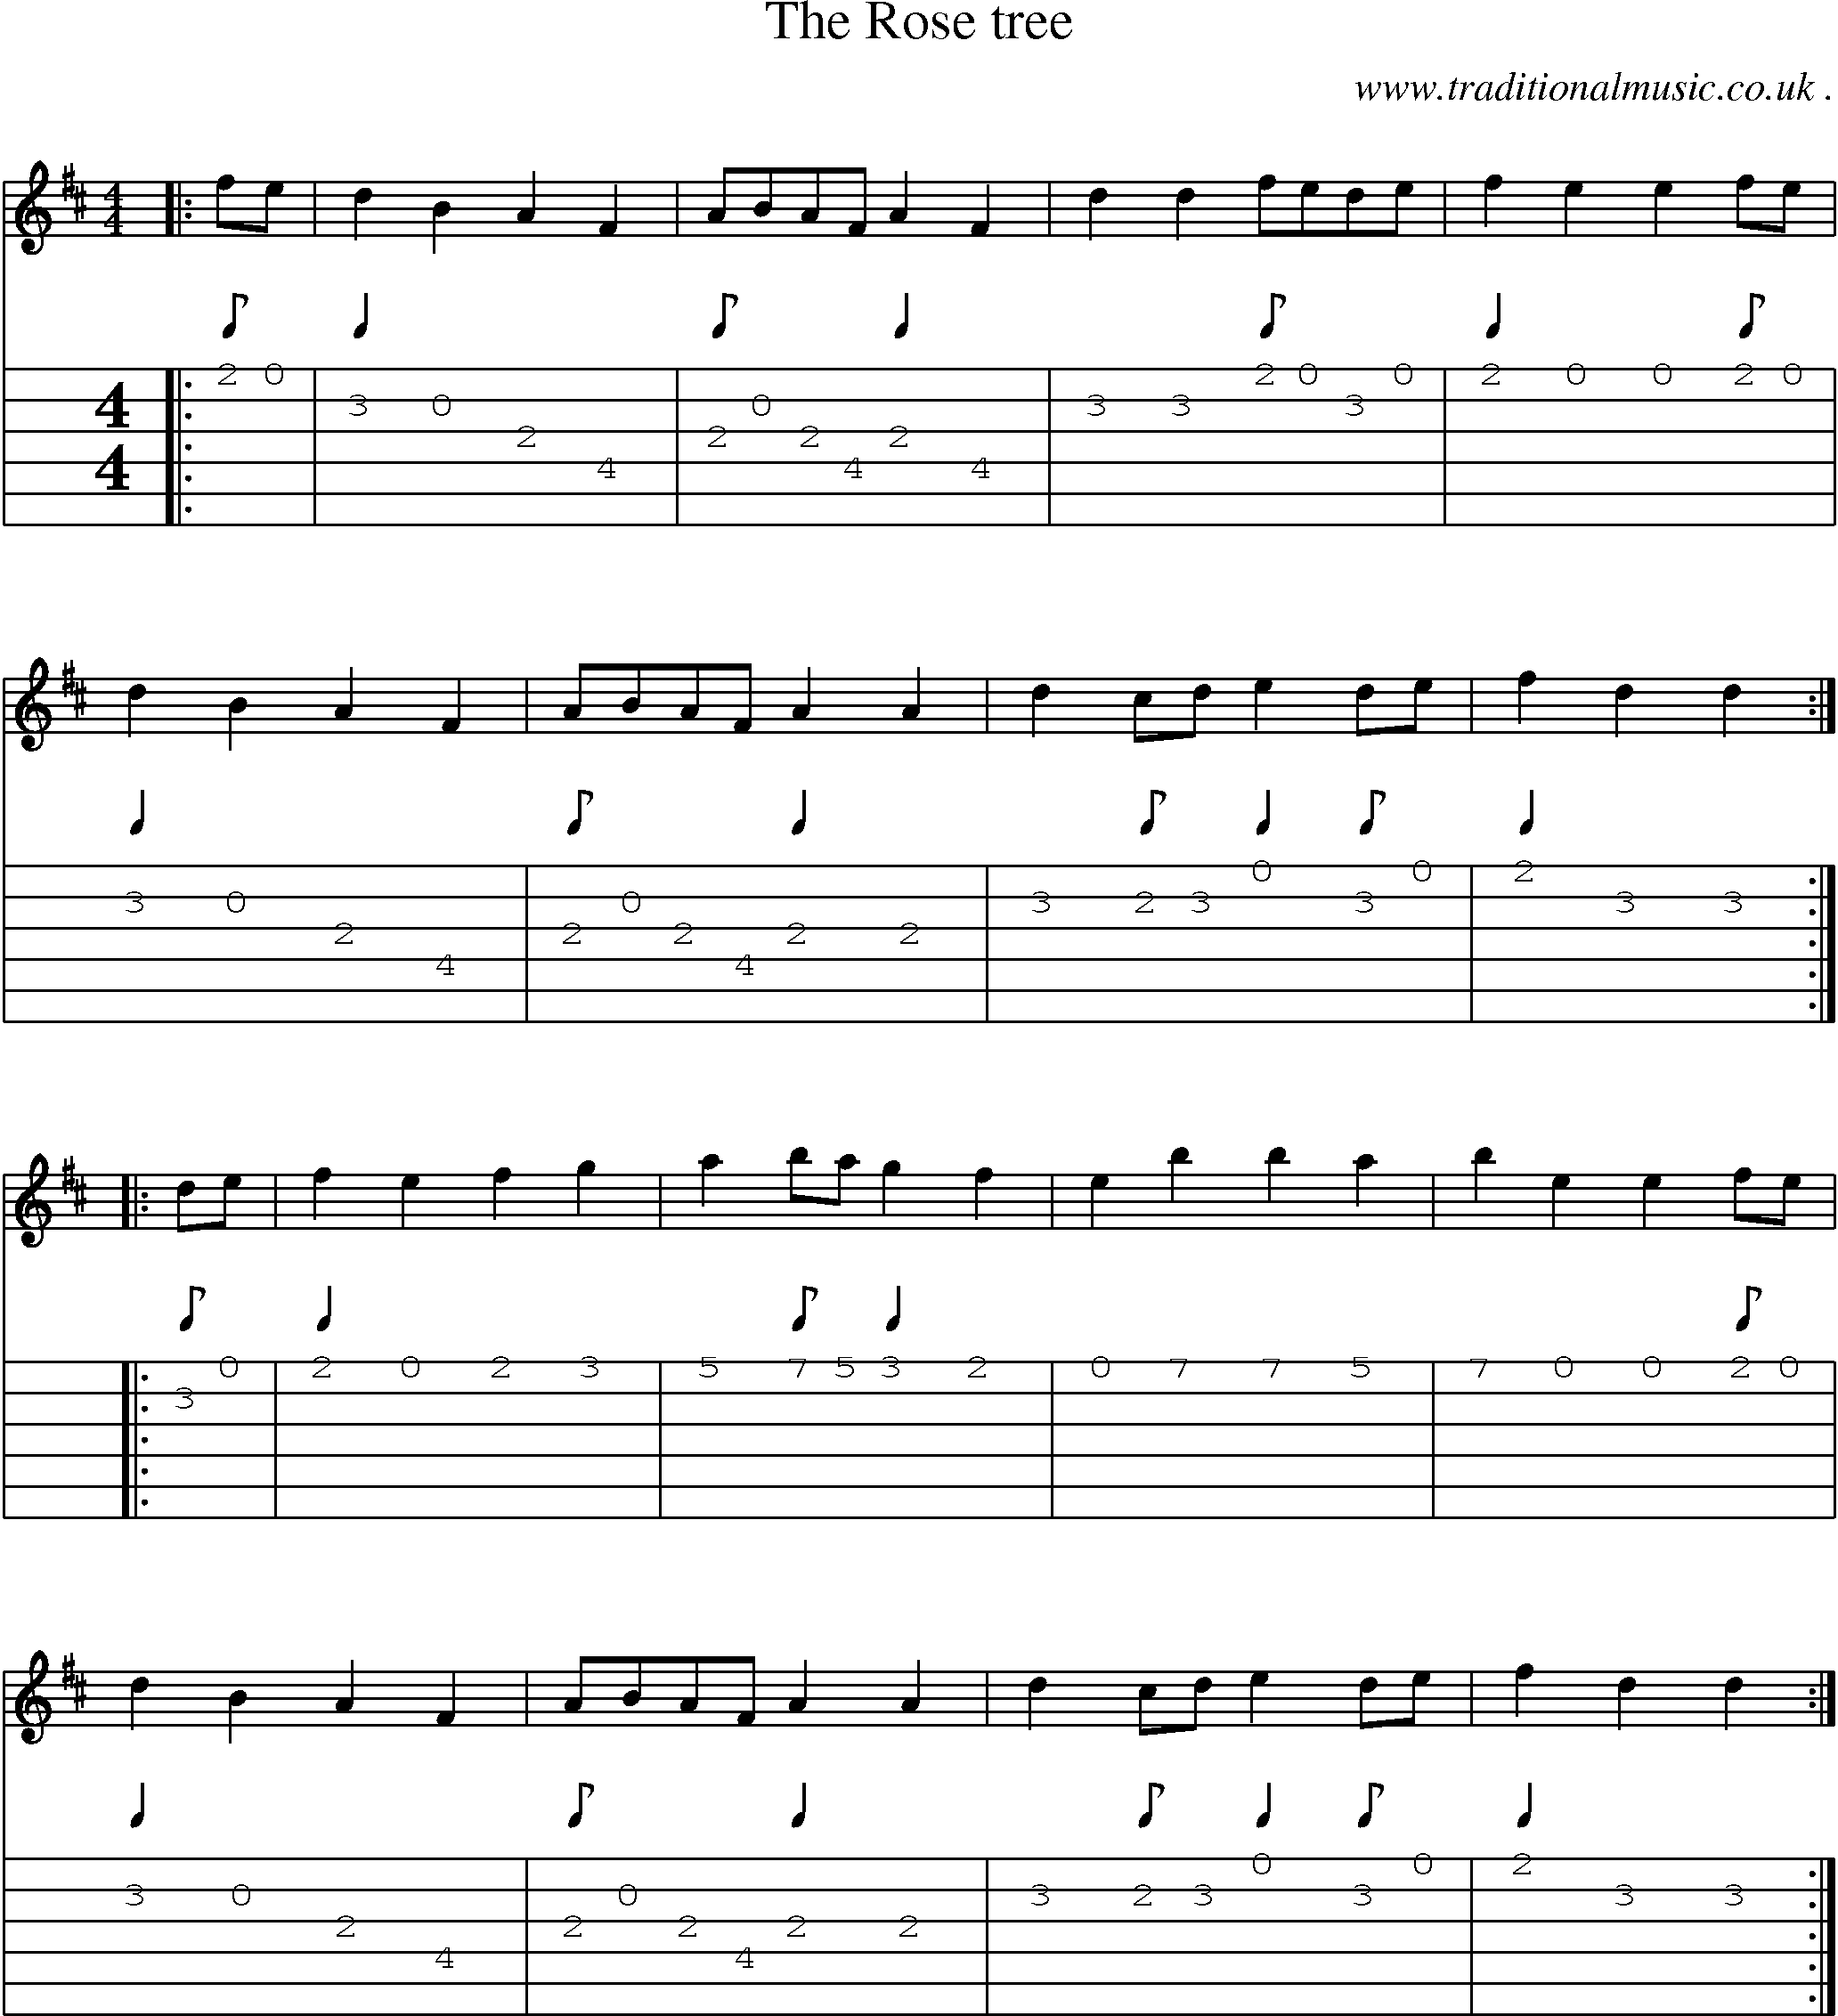 Sheet-Music and Guitar Tabs for The Rose Tree